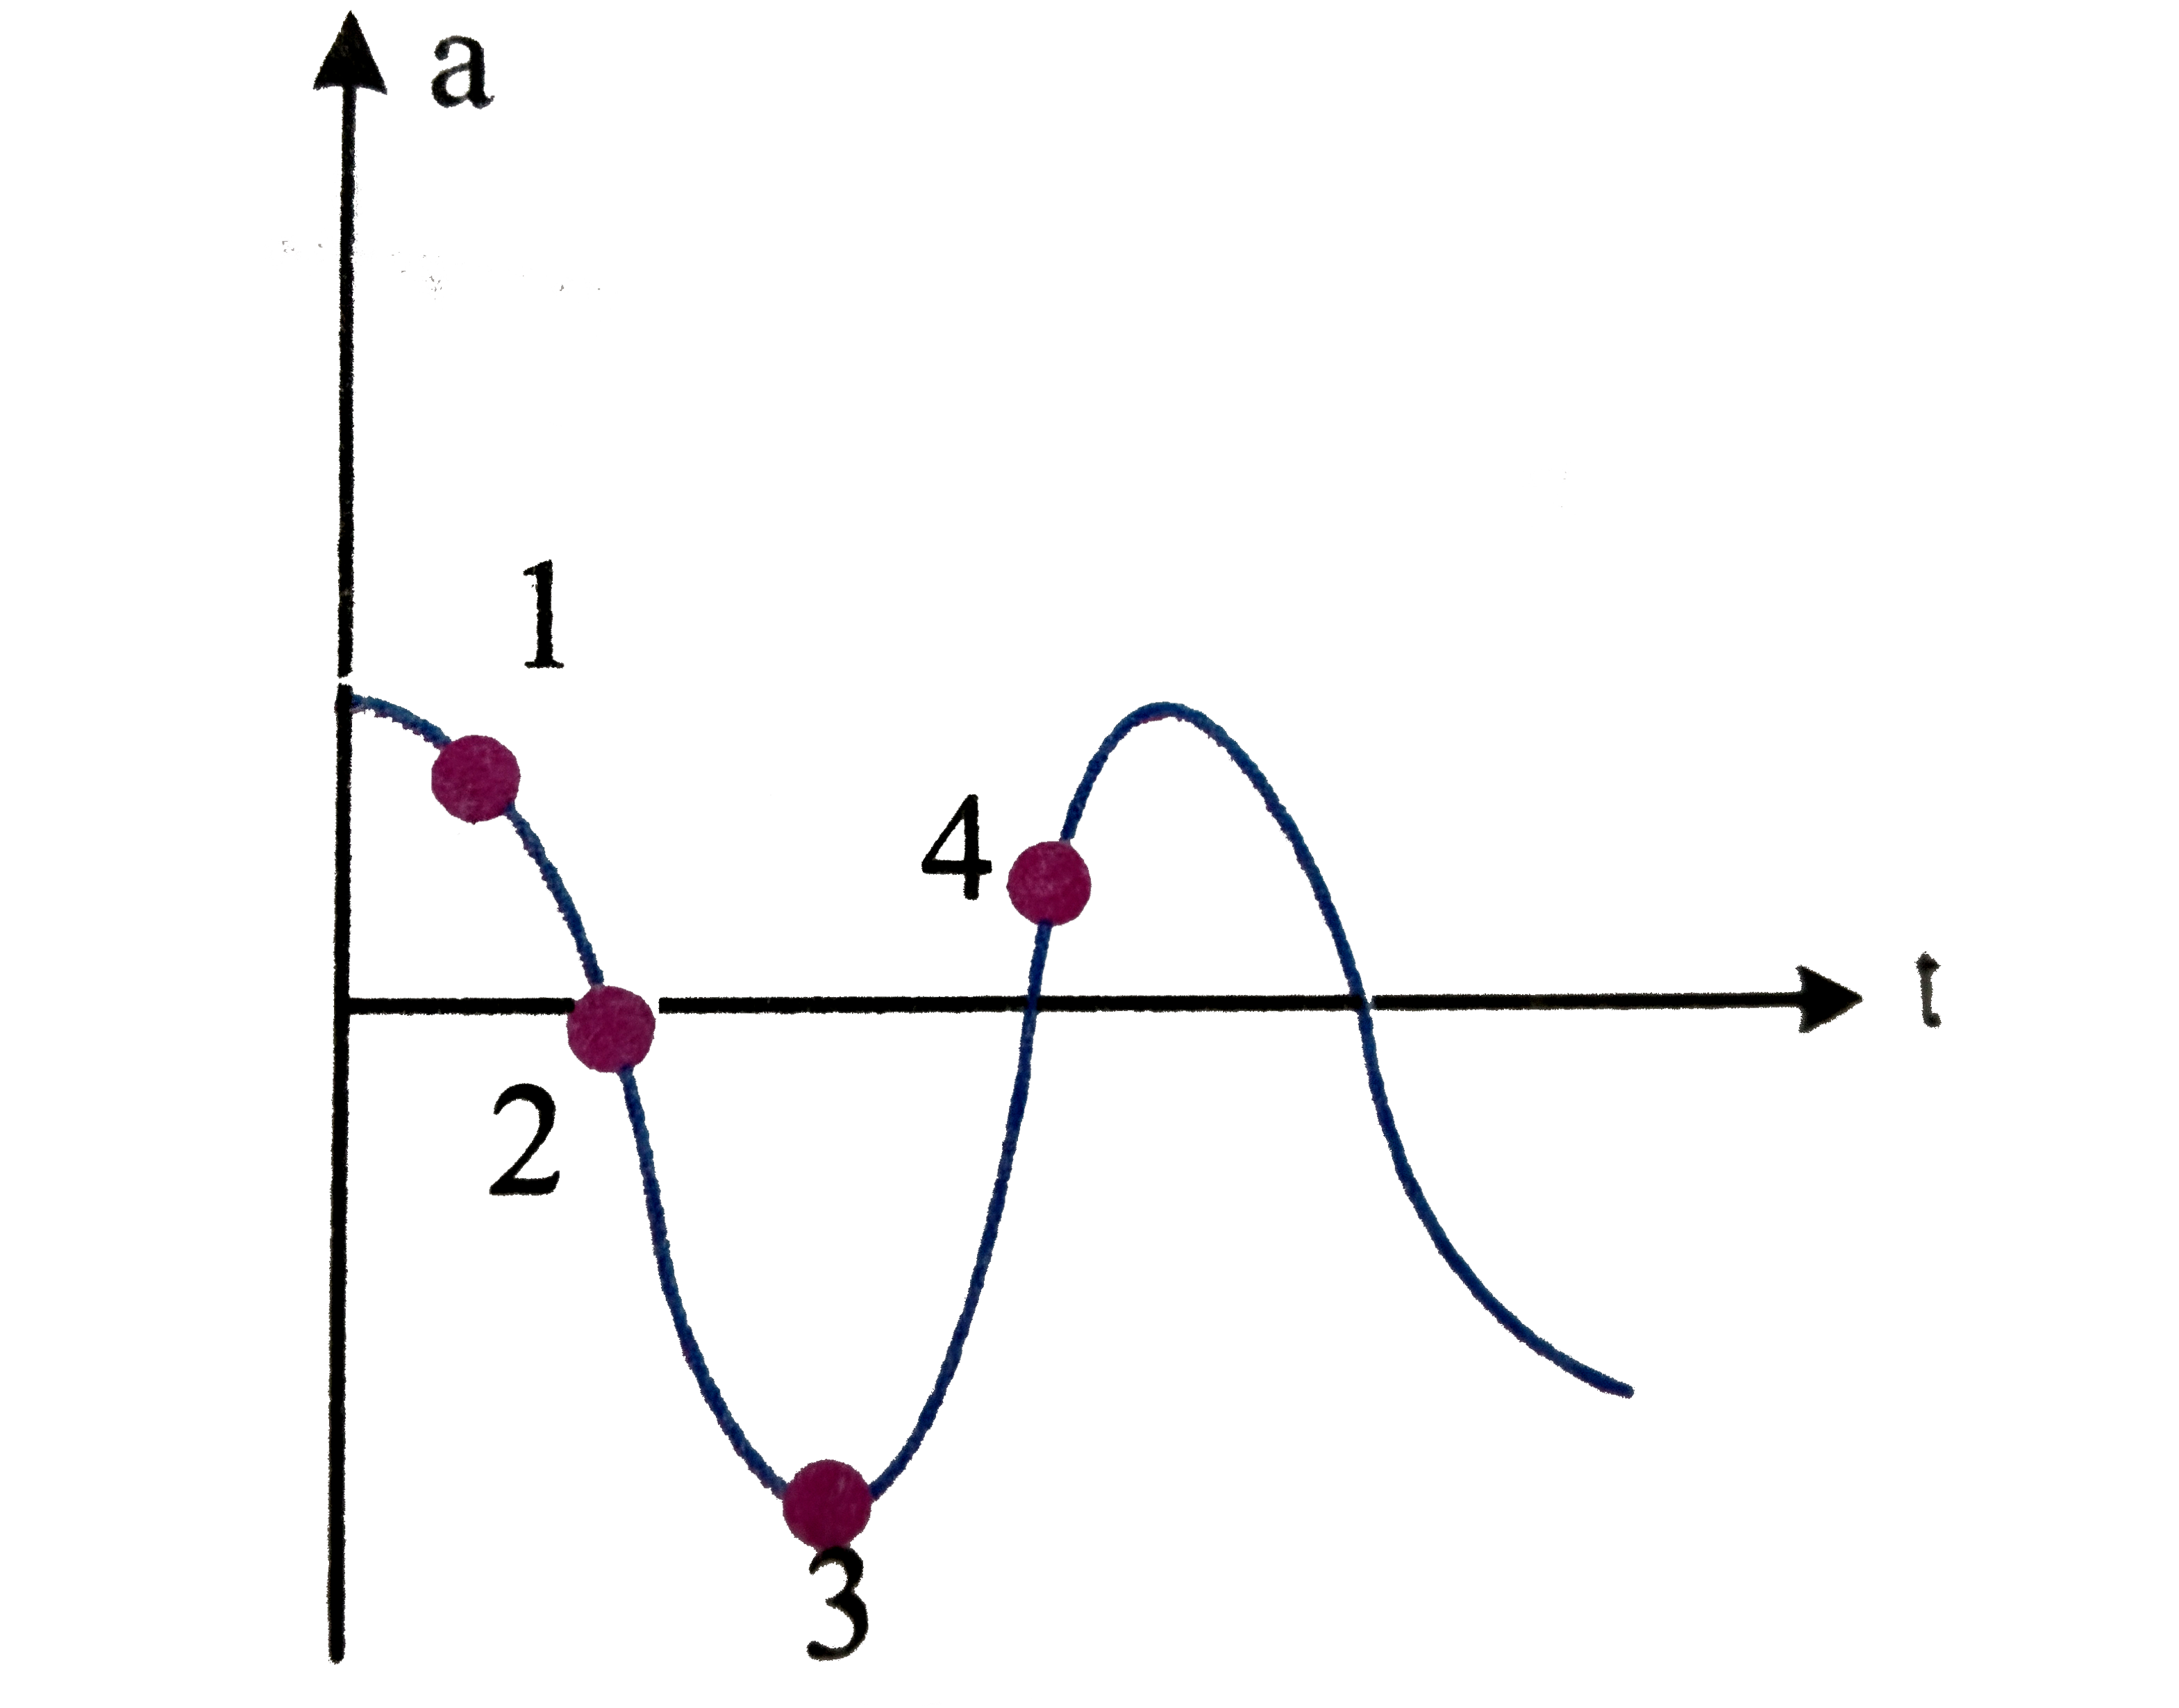 Acceleration -time graph of a particel executing SHM is as shown in fig. Then   (i) displacement of particle at 1 is -ve   (ii) velocity of particel at 2 is +ve   (iii) potential enegry of particel at 3 is maximum   (iv) speed of particel at 4 is decreasing.